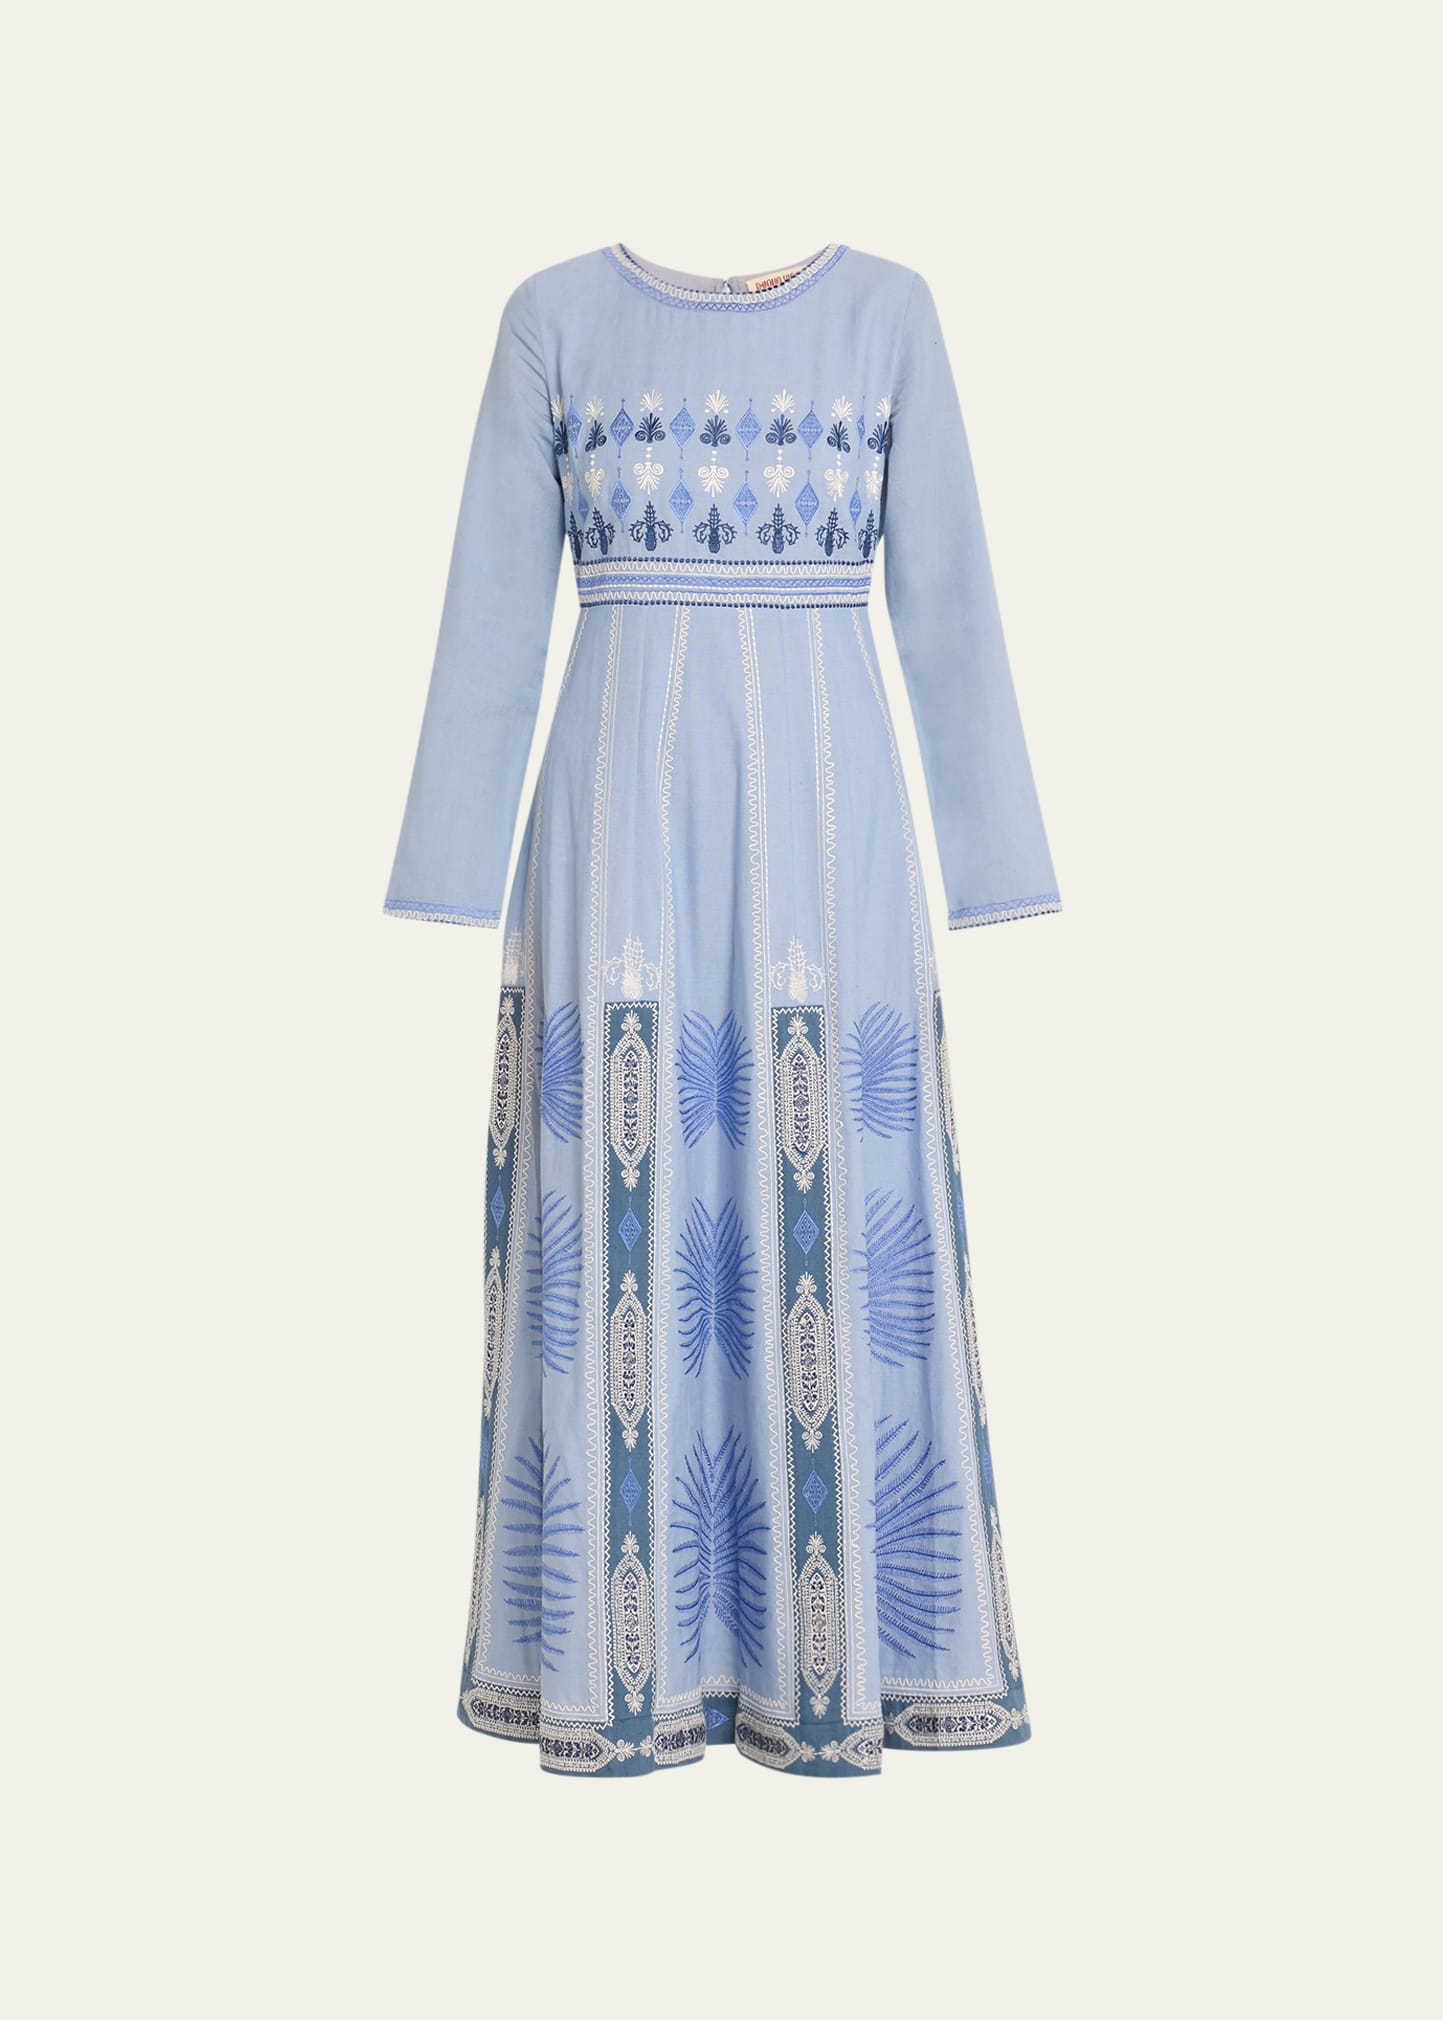 Emporio Sirenuse Tracey Chios Embroidered Linen Dress In Provence Blue